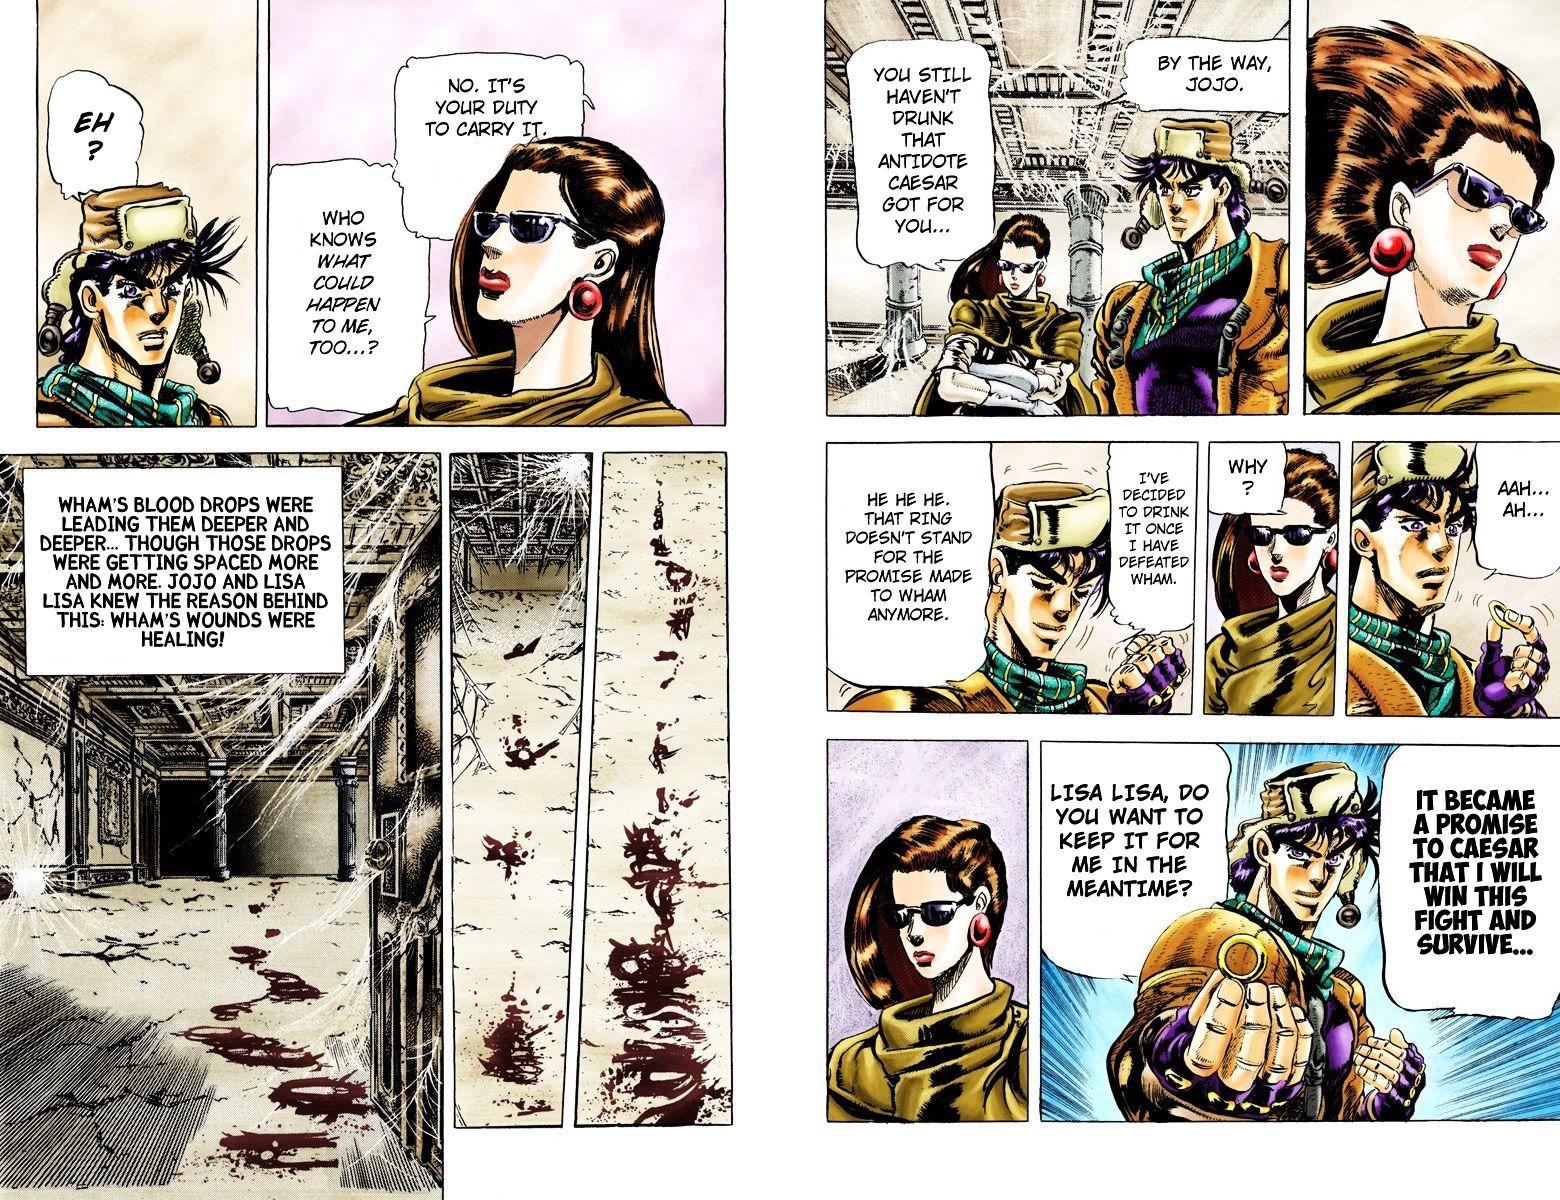 Jojo's Bizarre Adventure Vol.10 Chapter 94 : Lisa Lisa And Her Silk Dance (Official Color Scans) page 10 - 